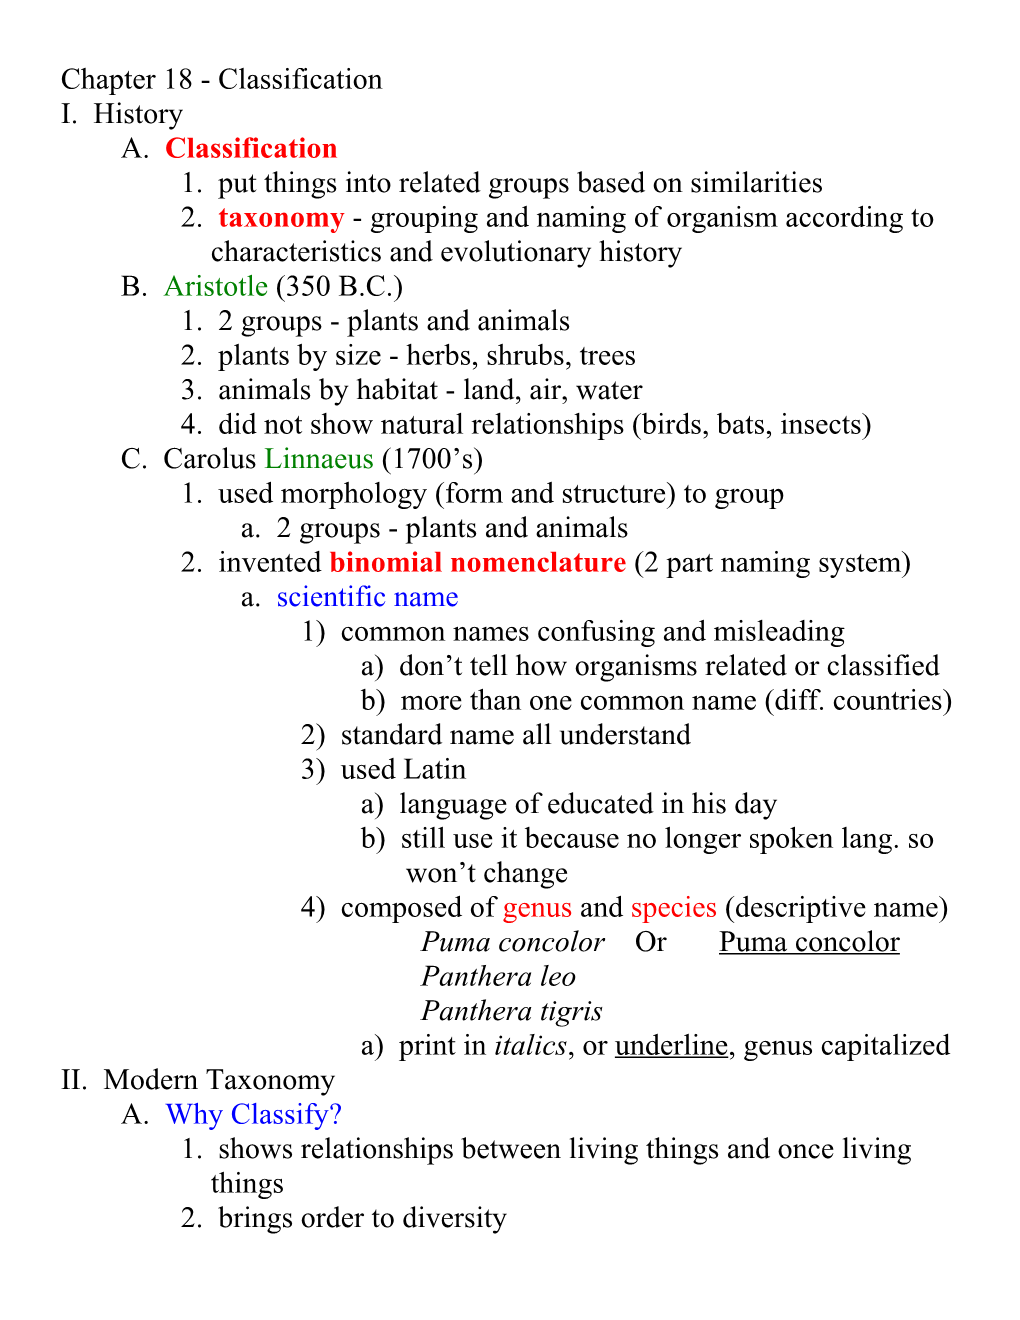 1. Put Things Into Related Groups Based on Similarities